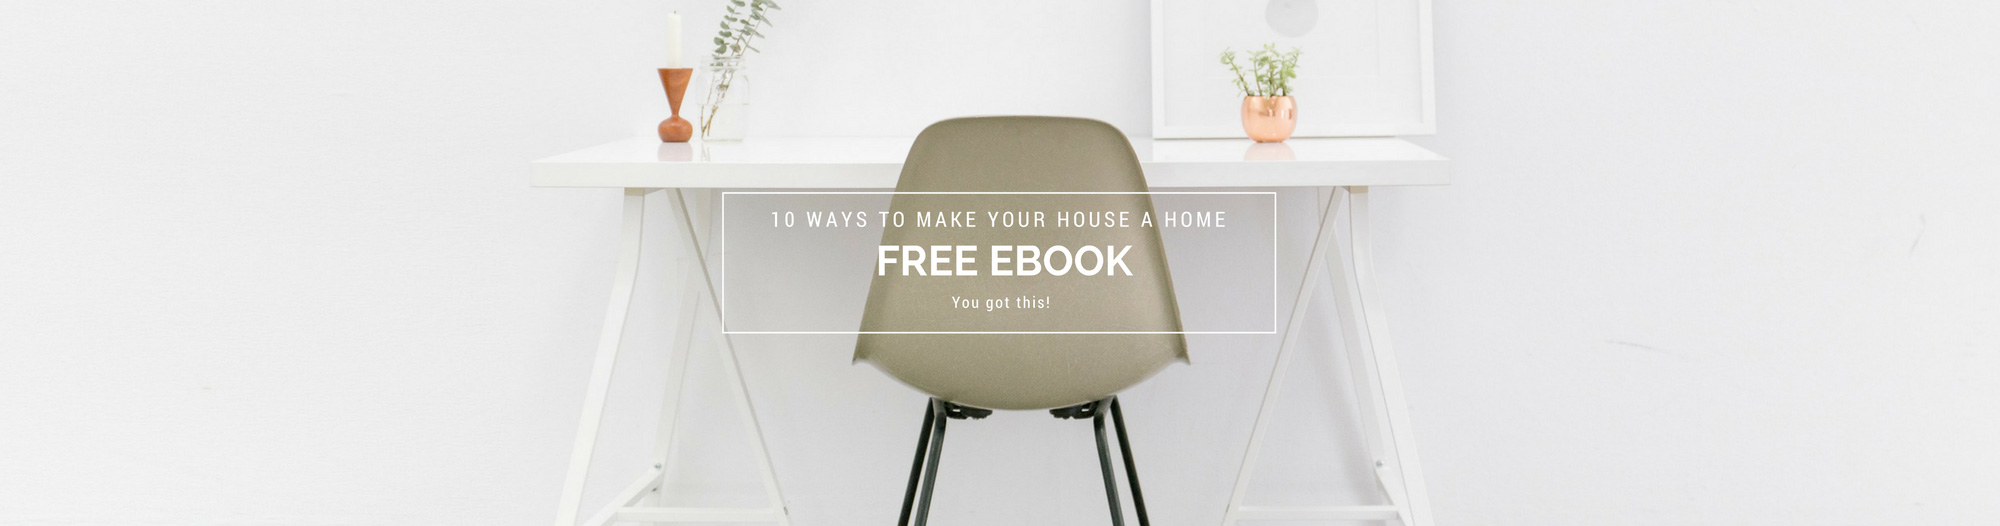 Get a free checklist of my 10 ten insider designer secrets on how to make your house a HOME. You got this! Via Lynne Knowlton Design The Life You Want To Live www.lynneknowlton.com